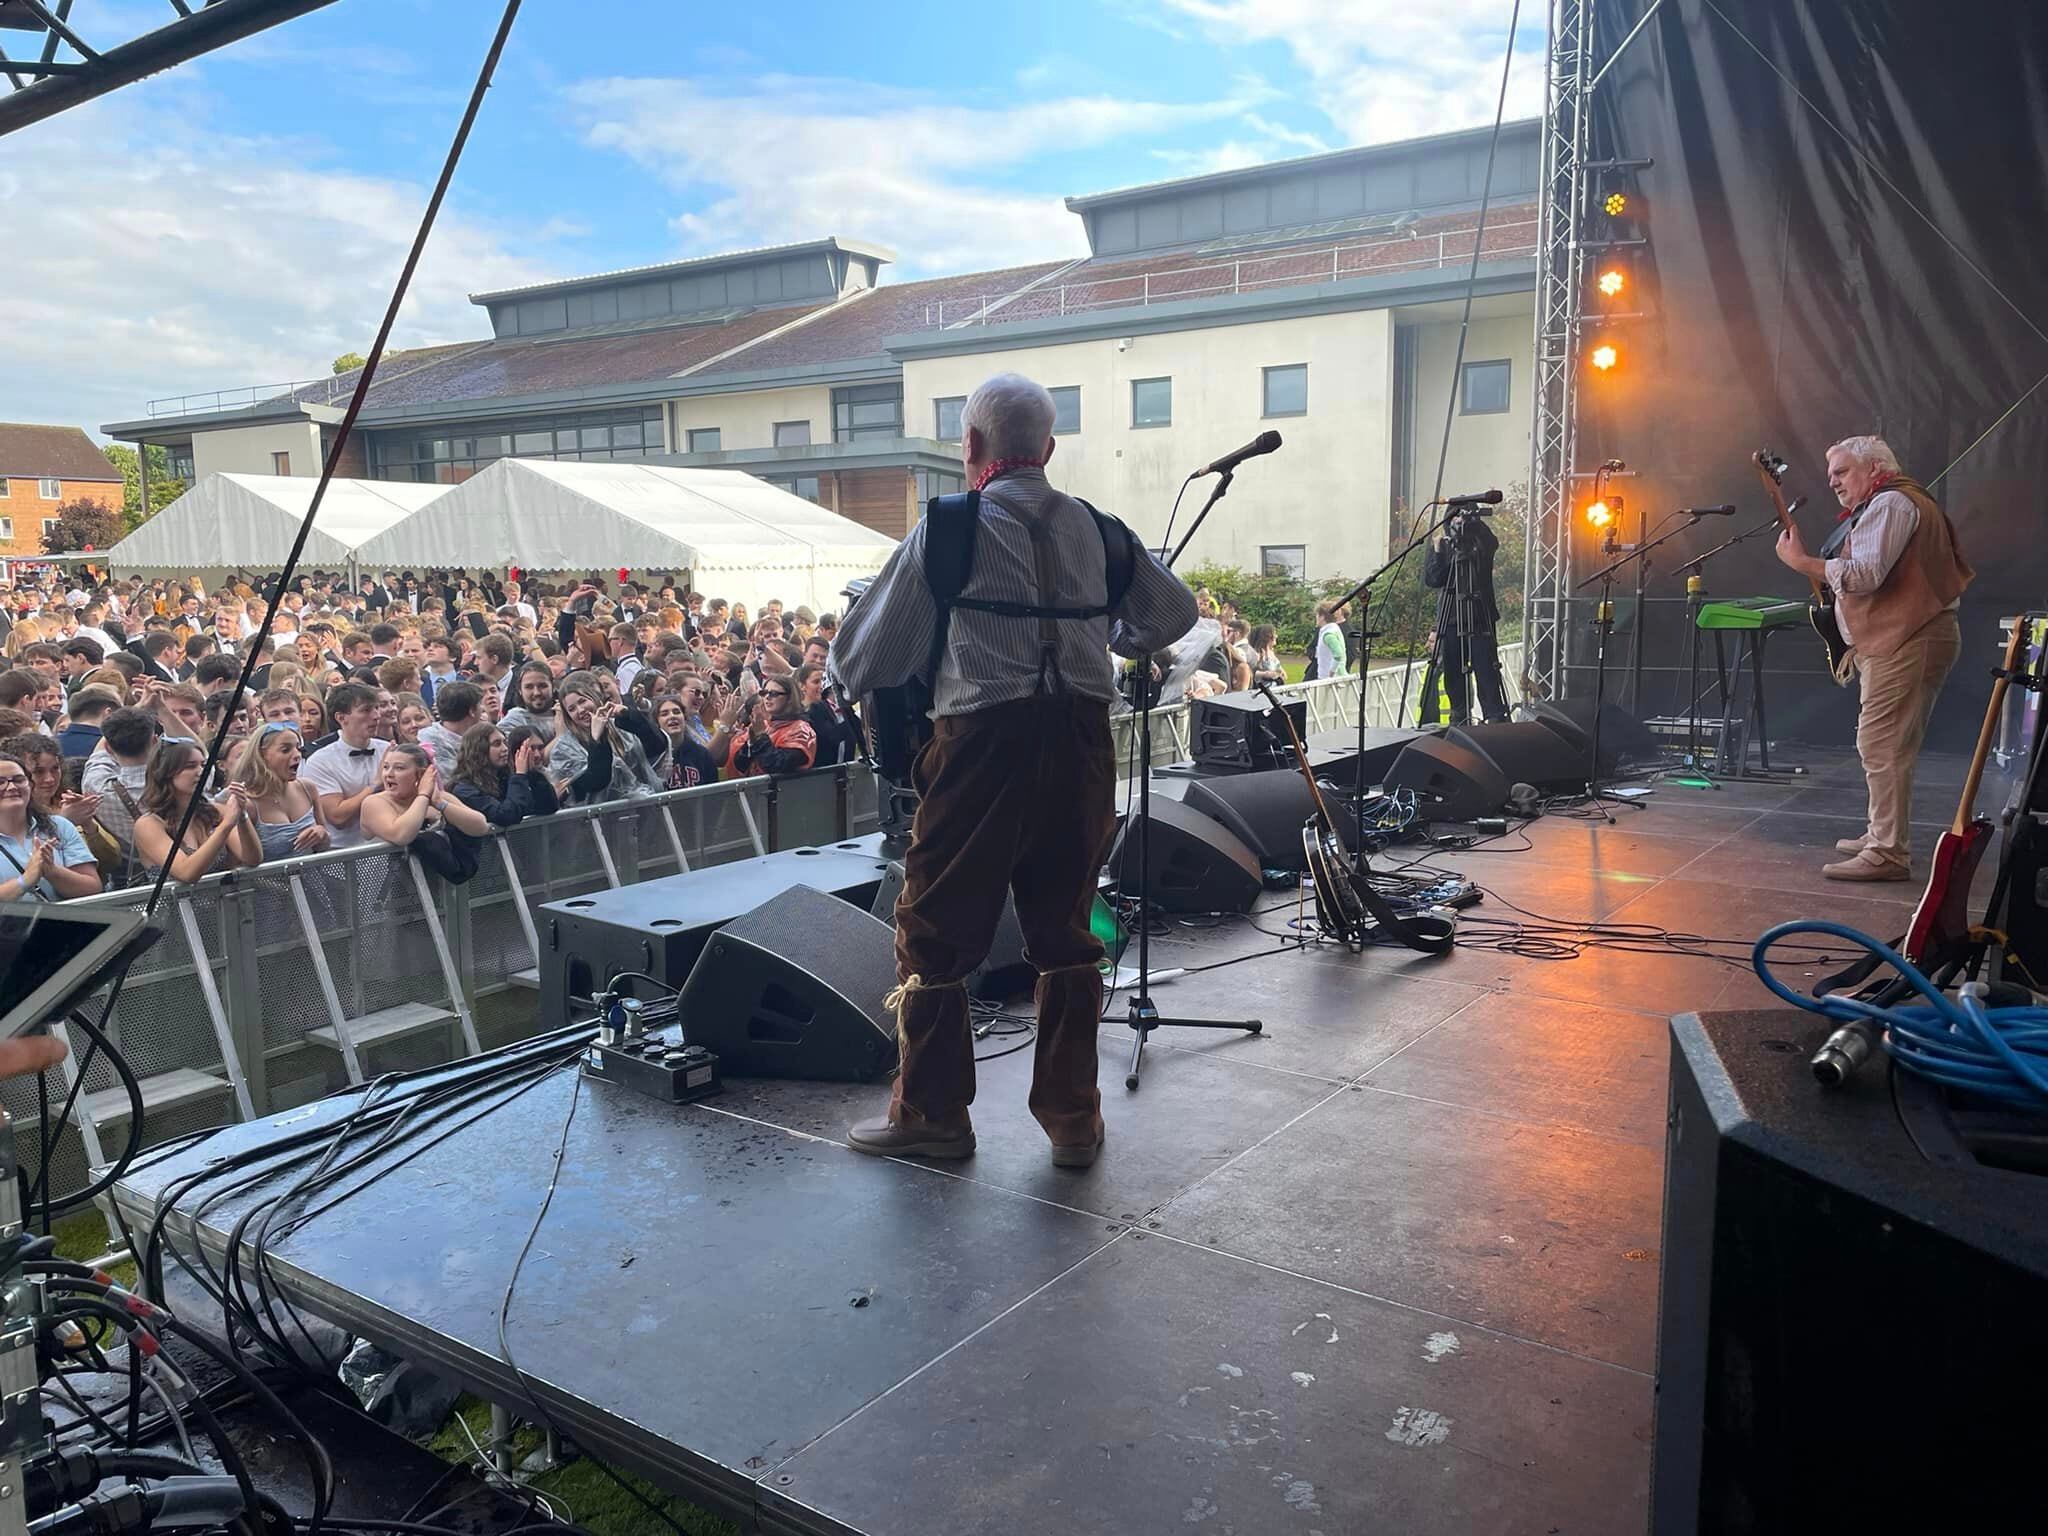 West Country 'scrumpy and western' legends The Wurzels take to the Harper Adams stage